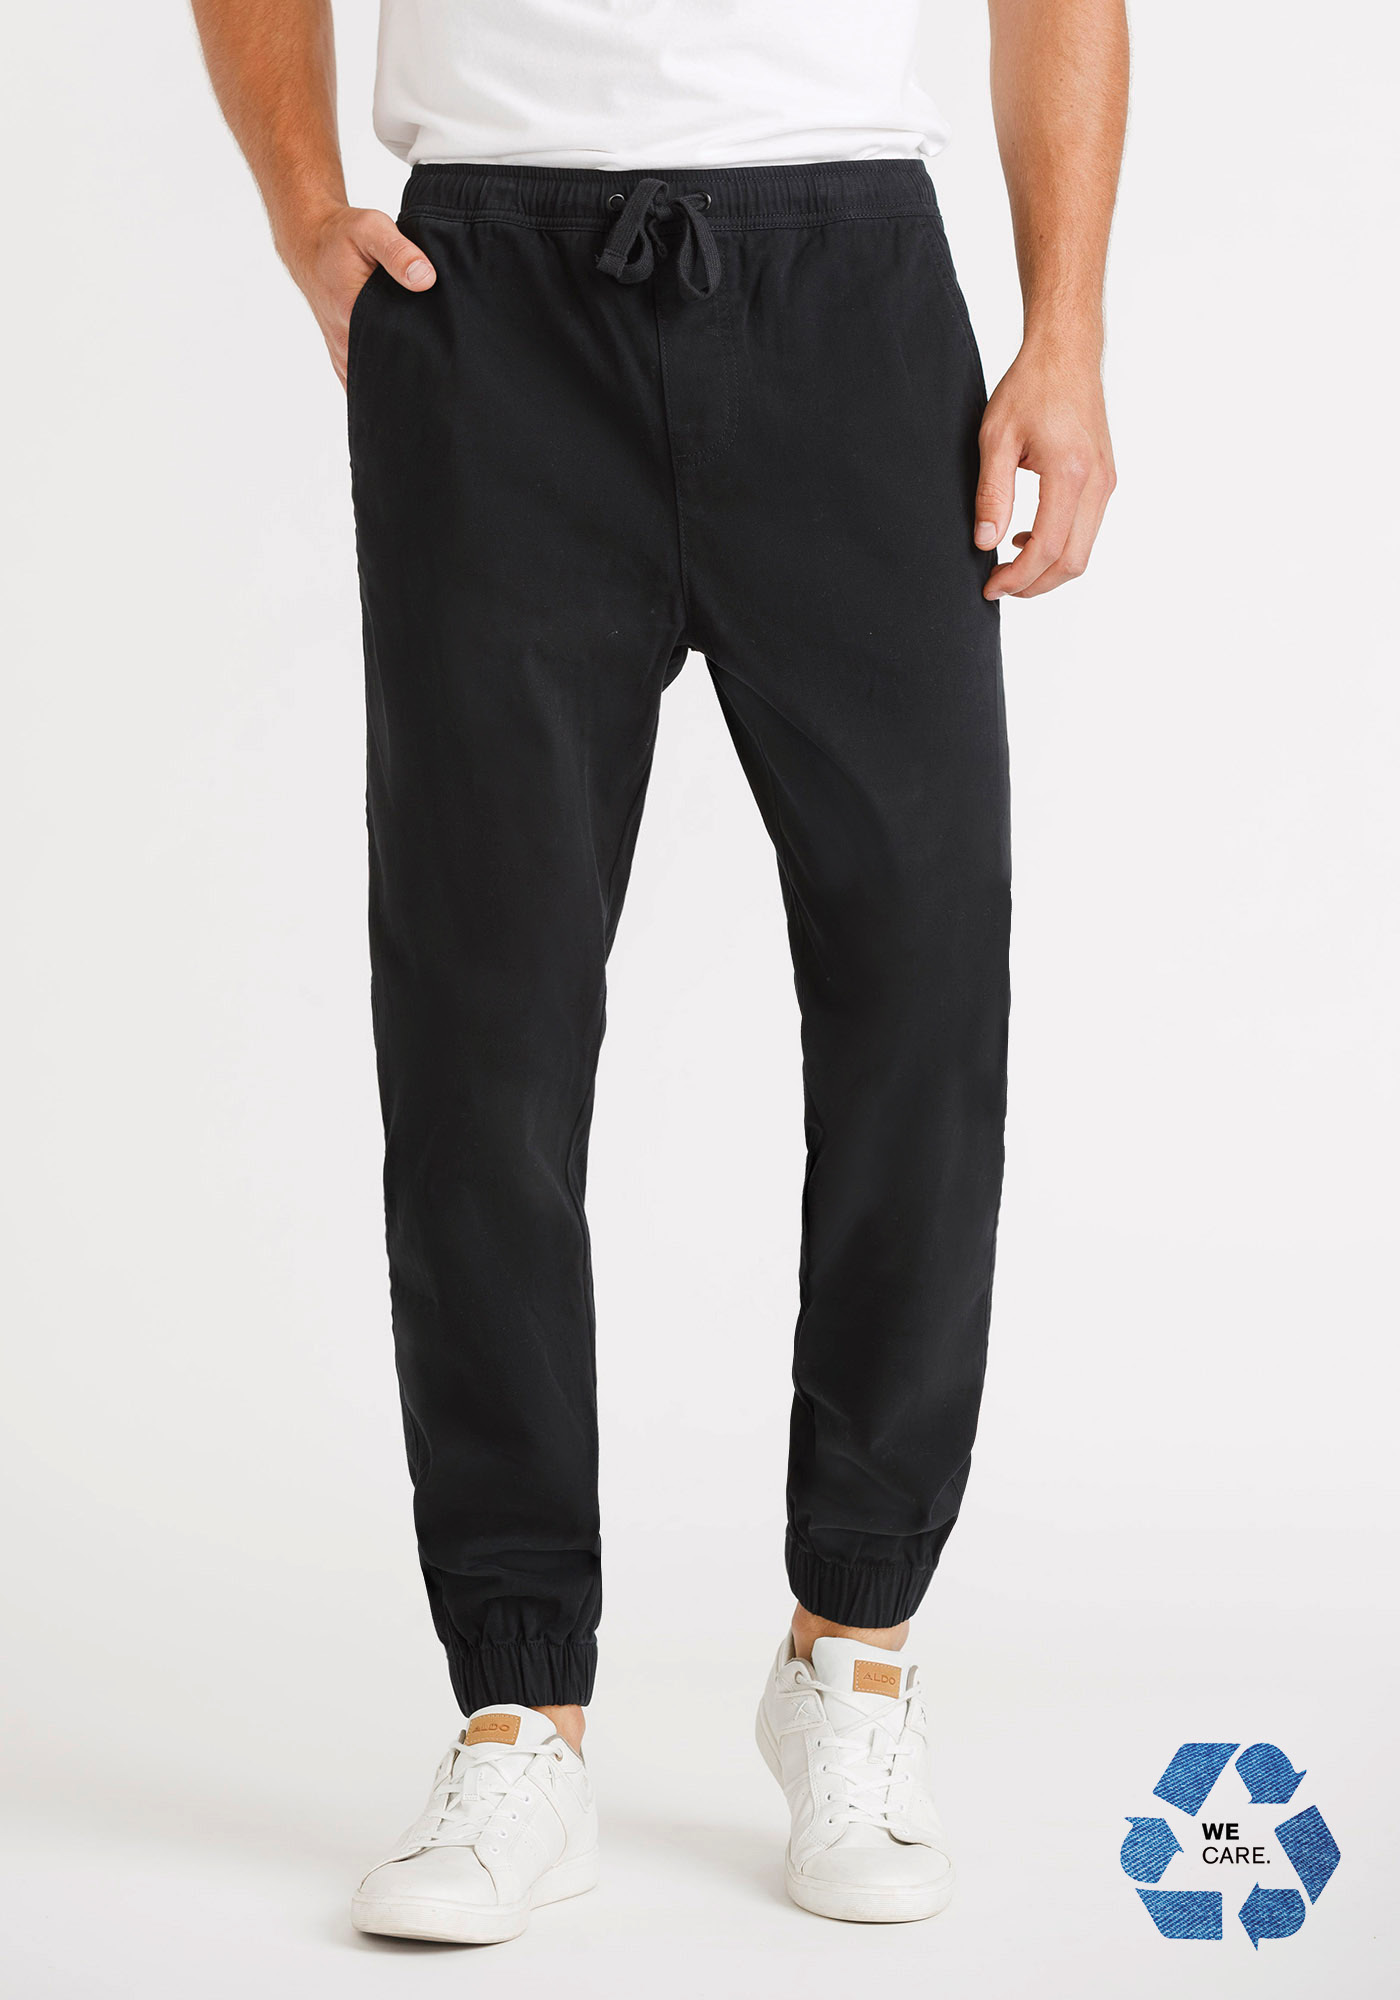 About Twill Jogger Pants, Streetwear Clothing